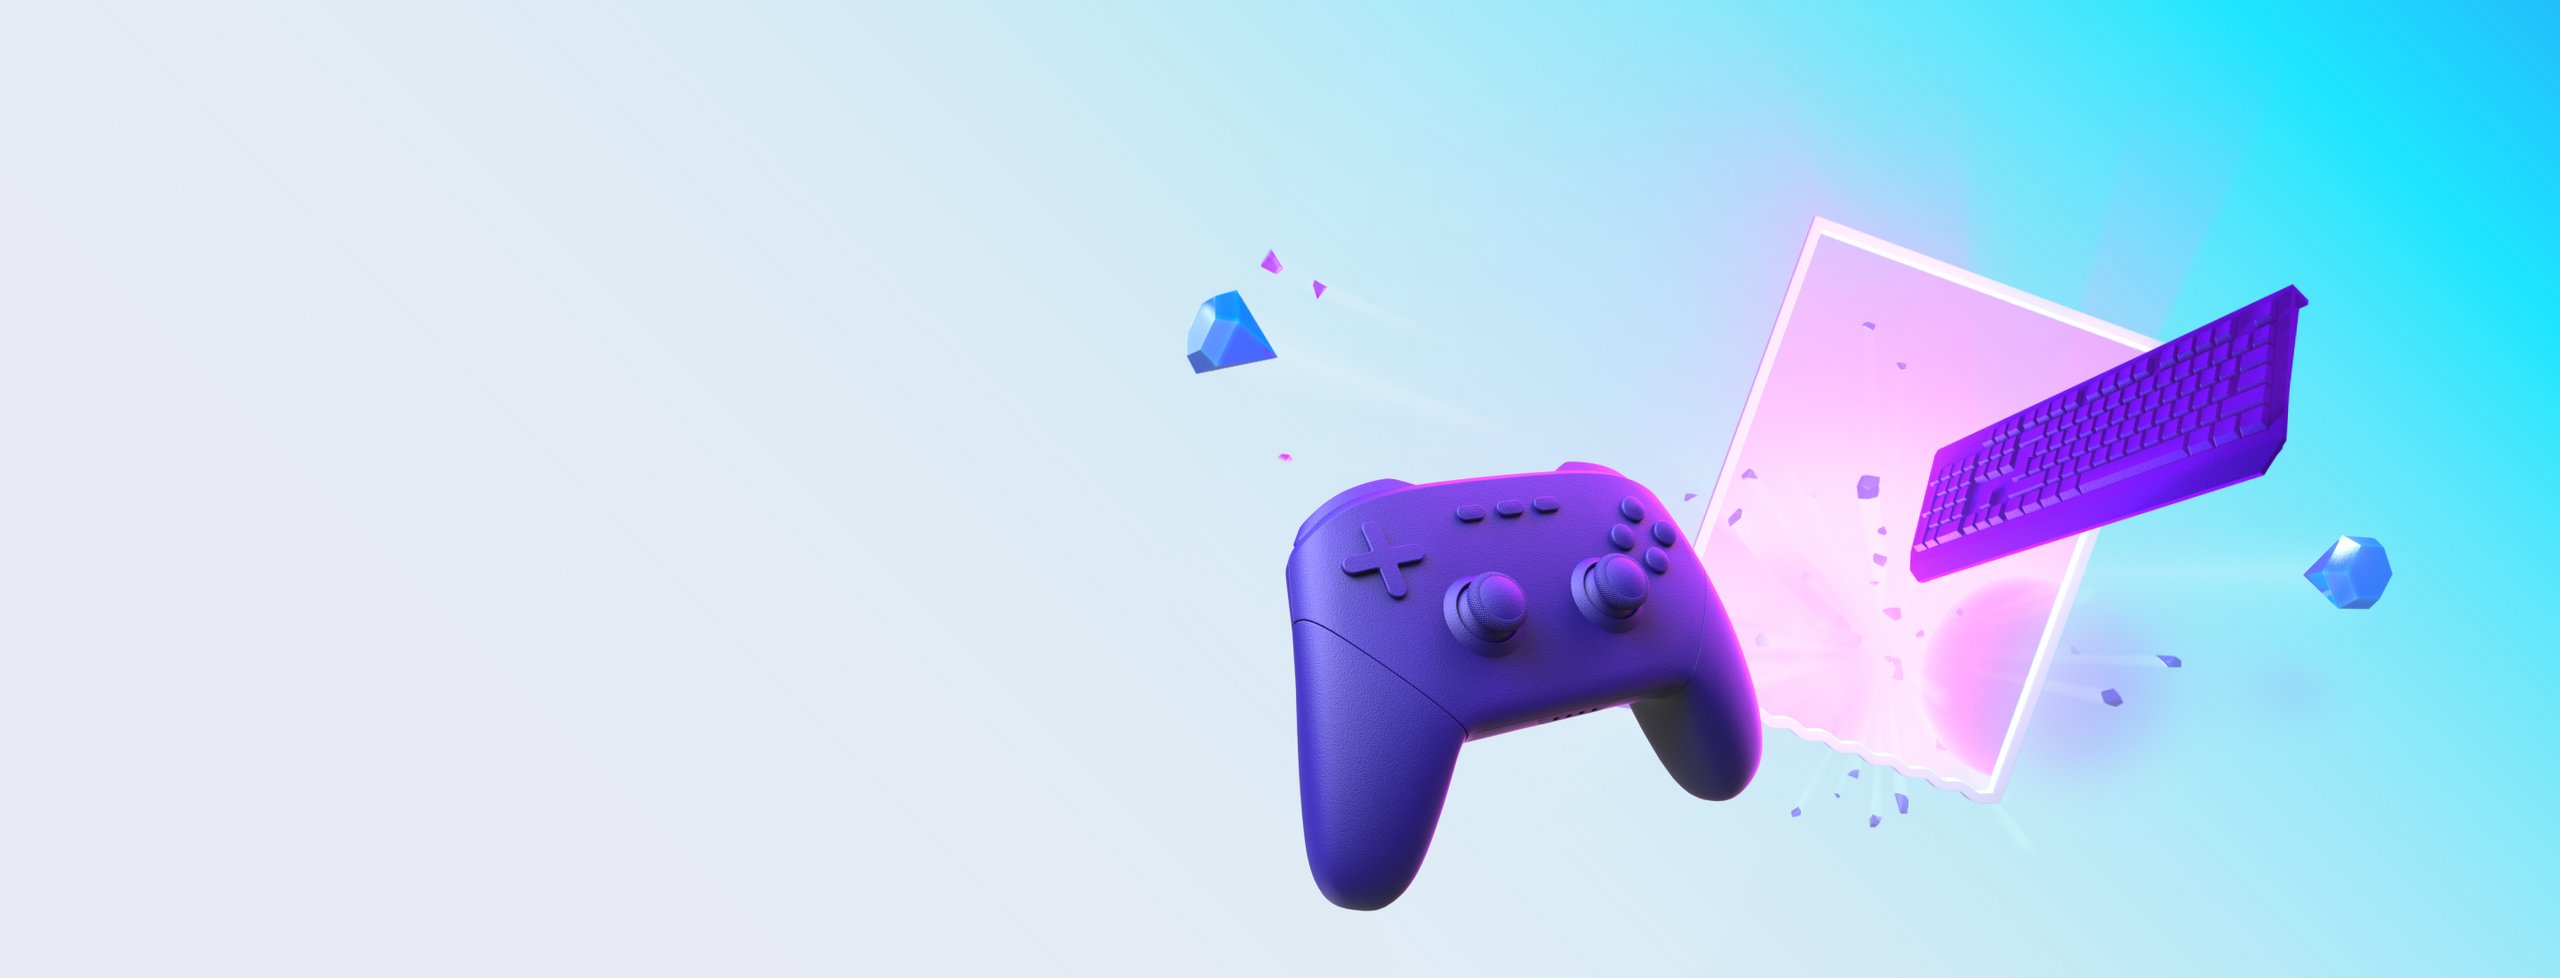 purple icons of a controller and a computer keyboard on the light blue background